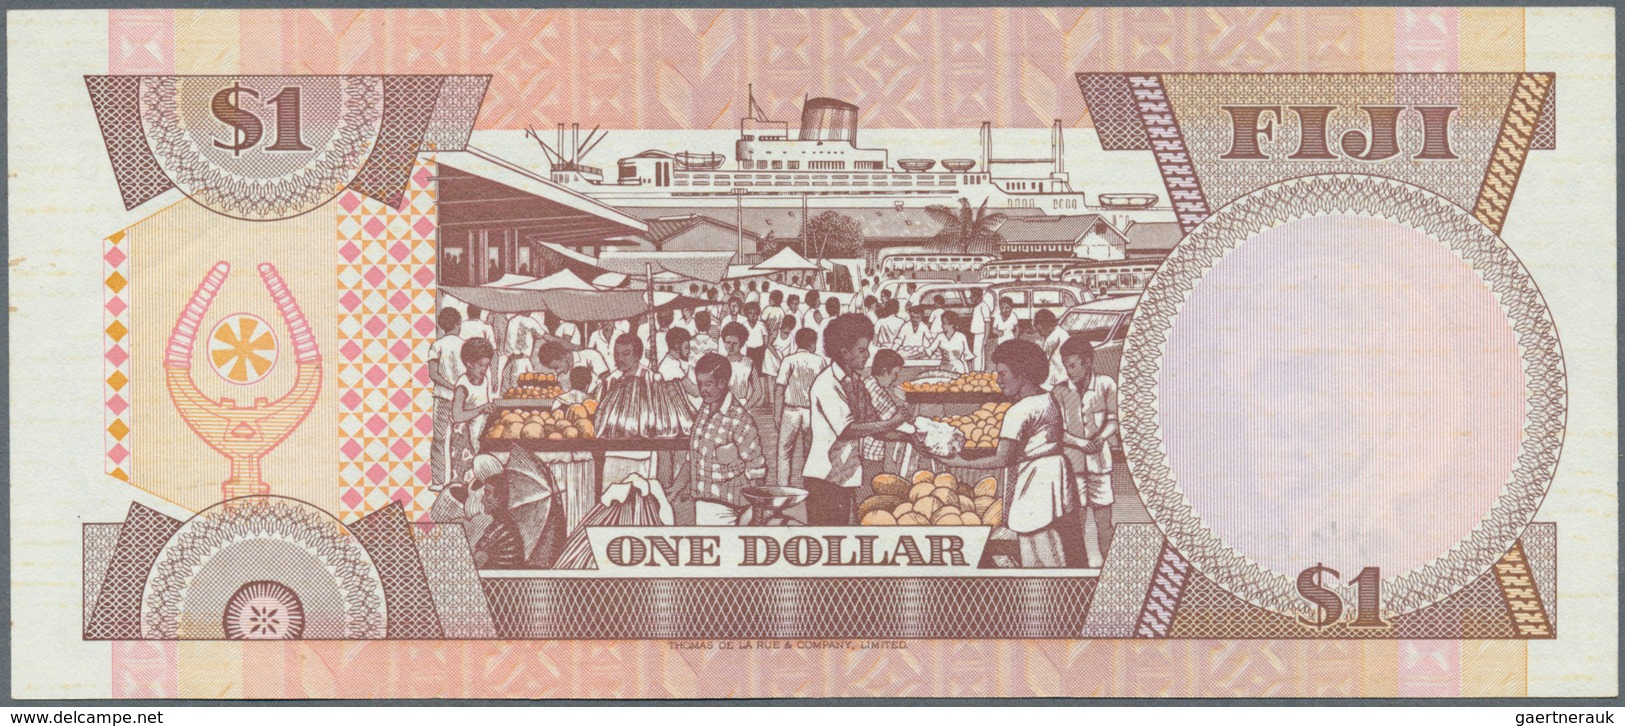 01449 Fiji: 1 Dollar 1980 Replacement Note Z/1 P. 76r In Condition: UNC. - Fiji